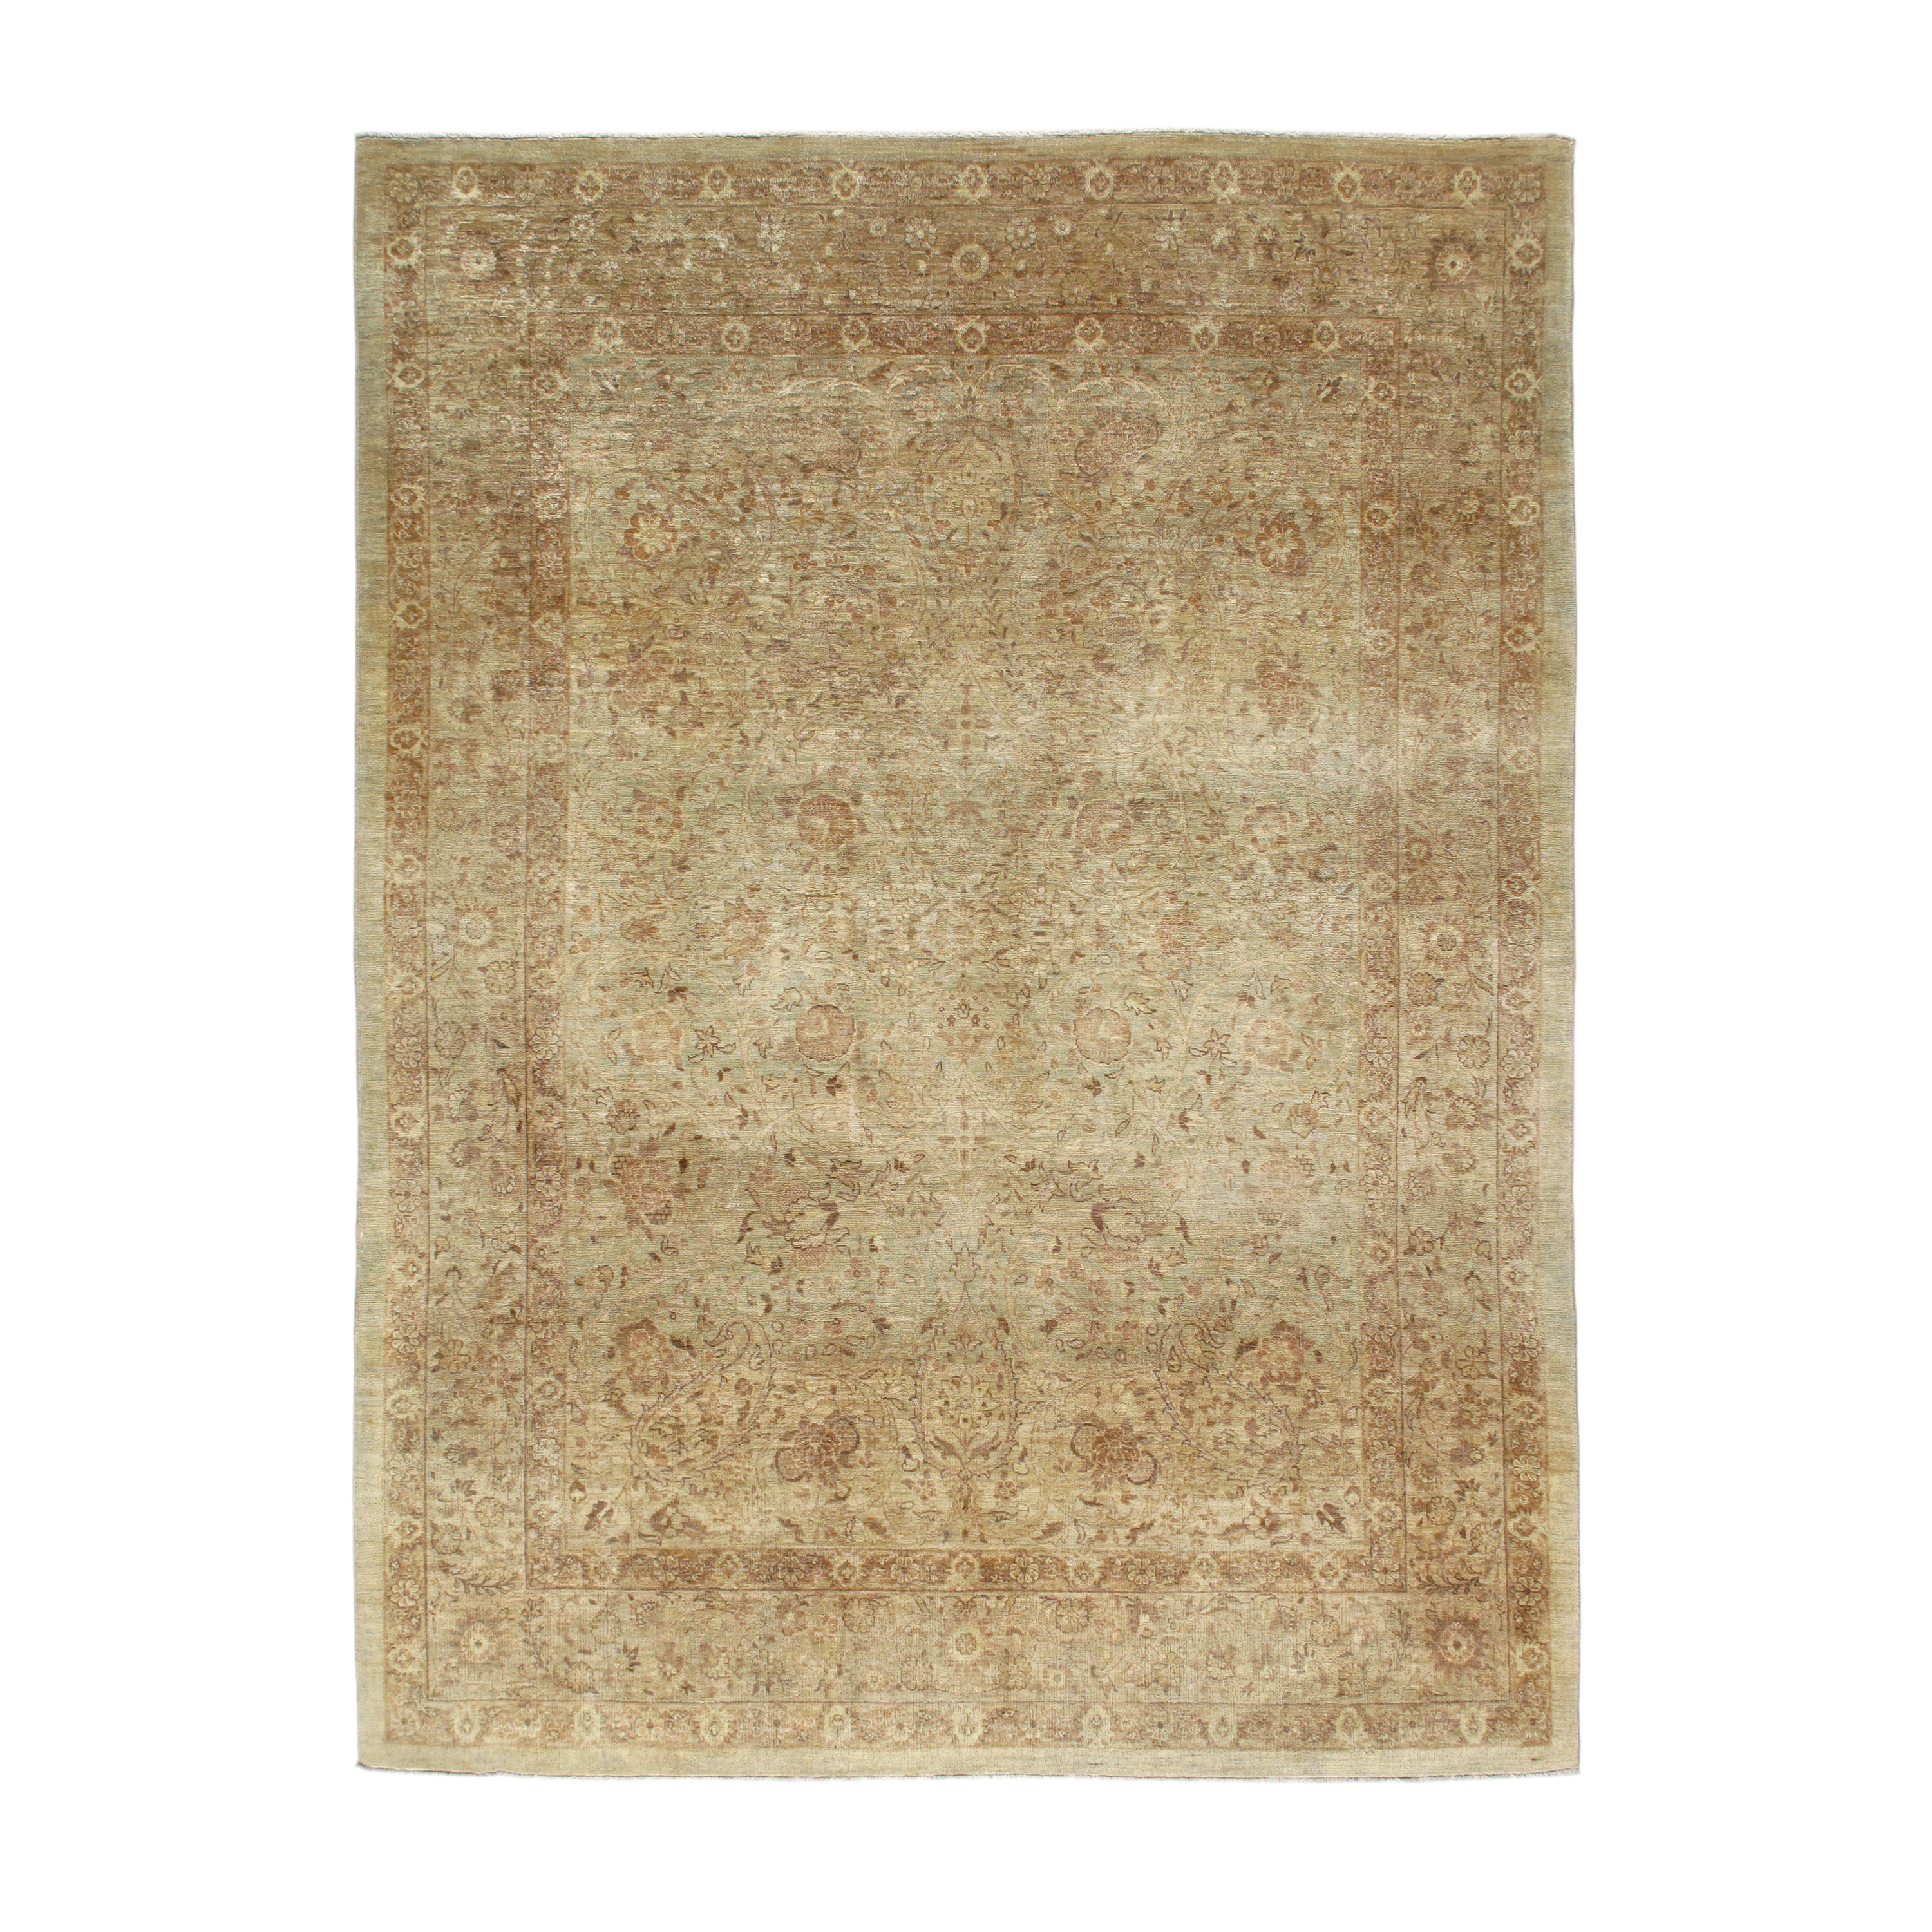 This Persian Tabriz rug is made with all natural dye.